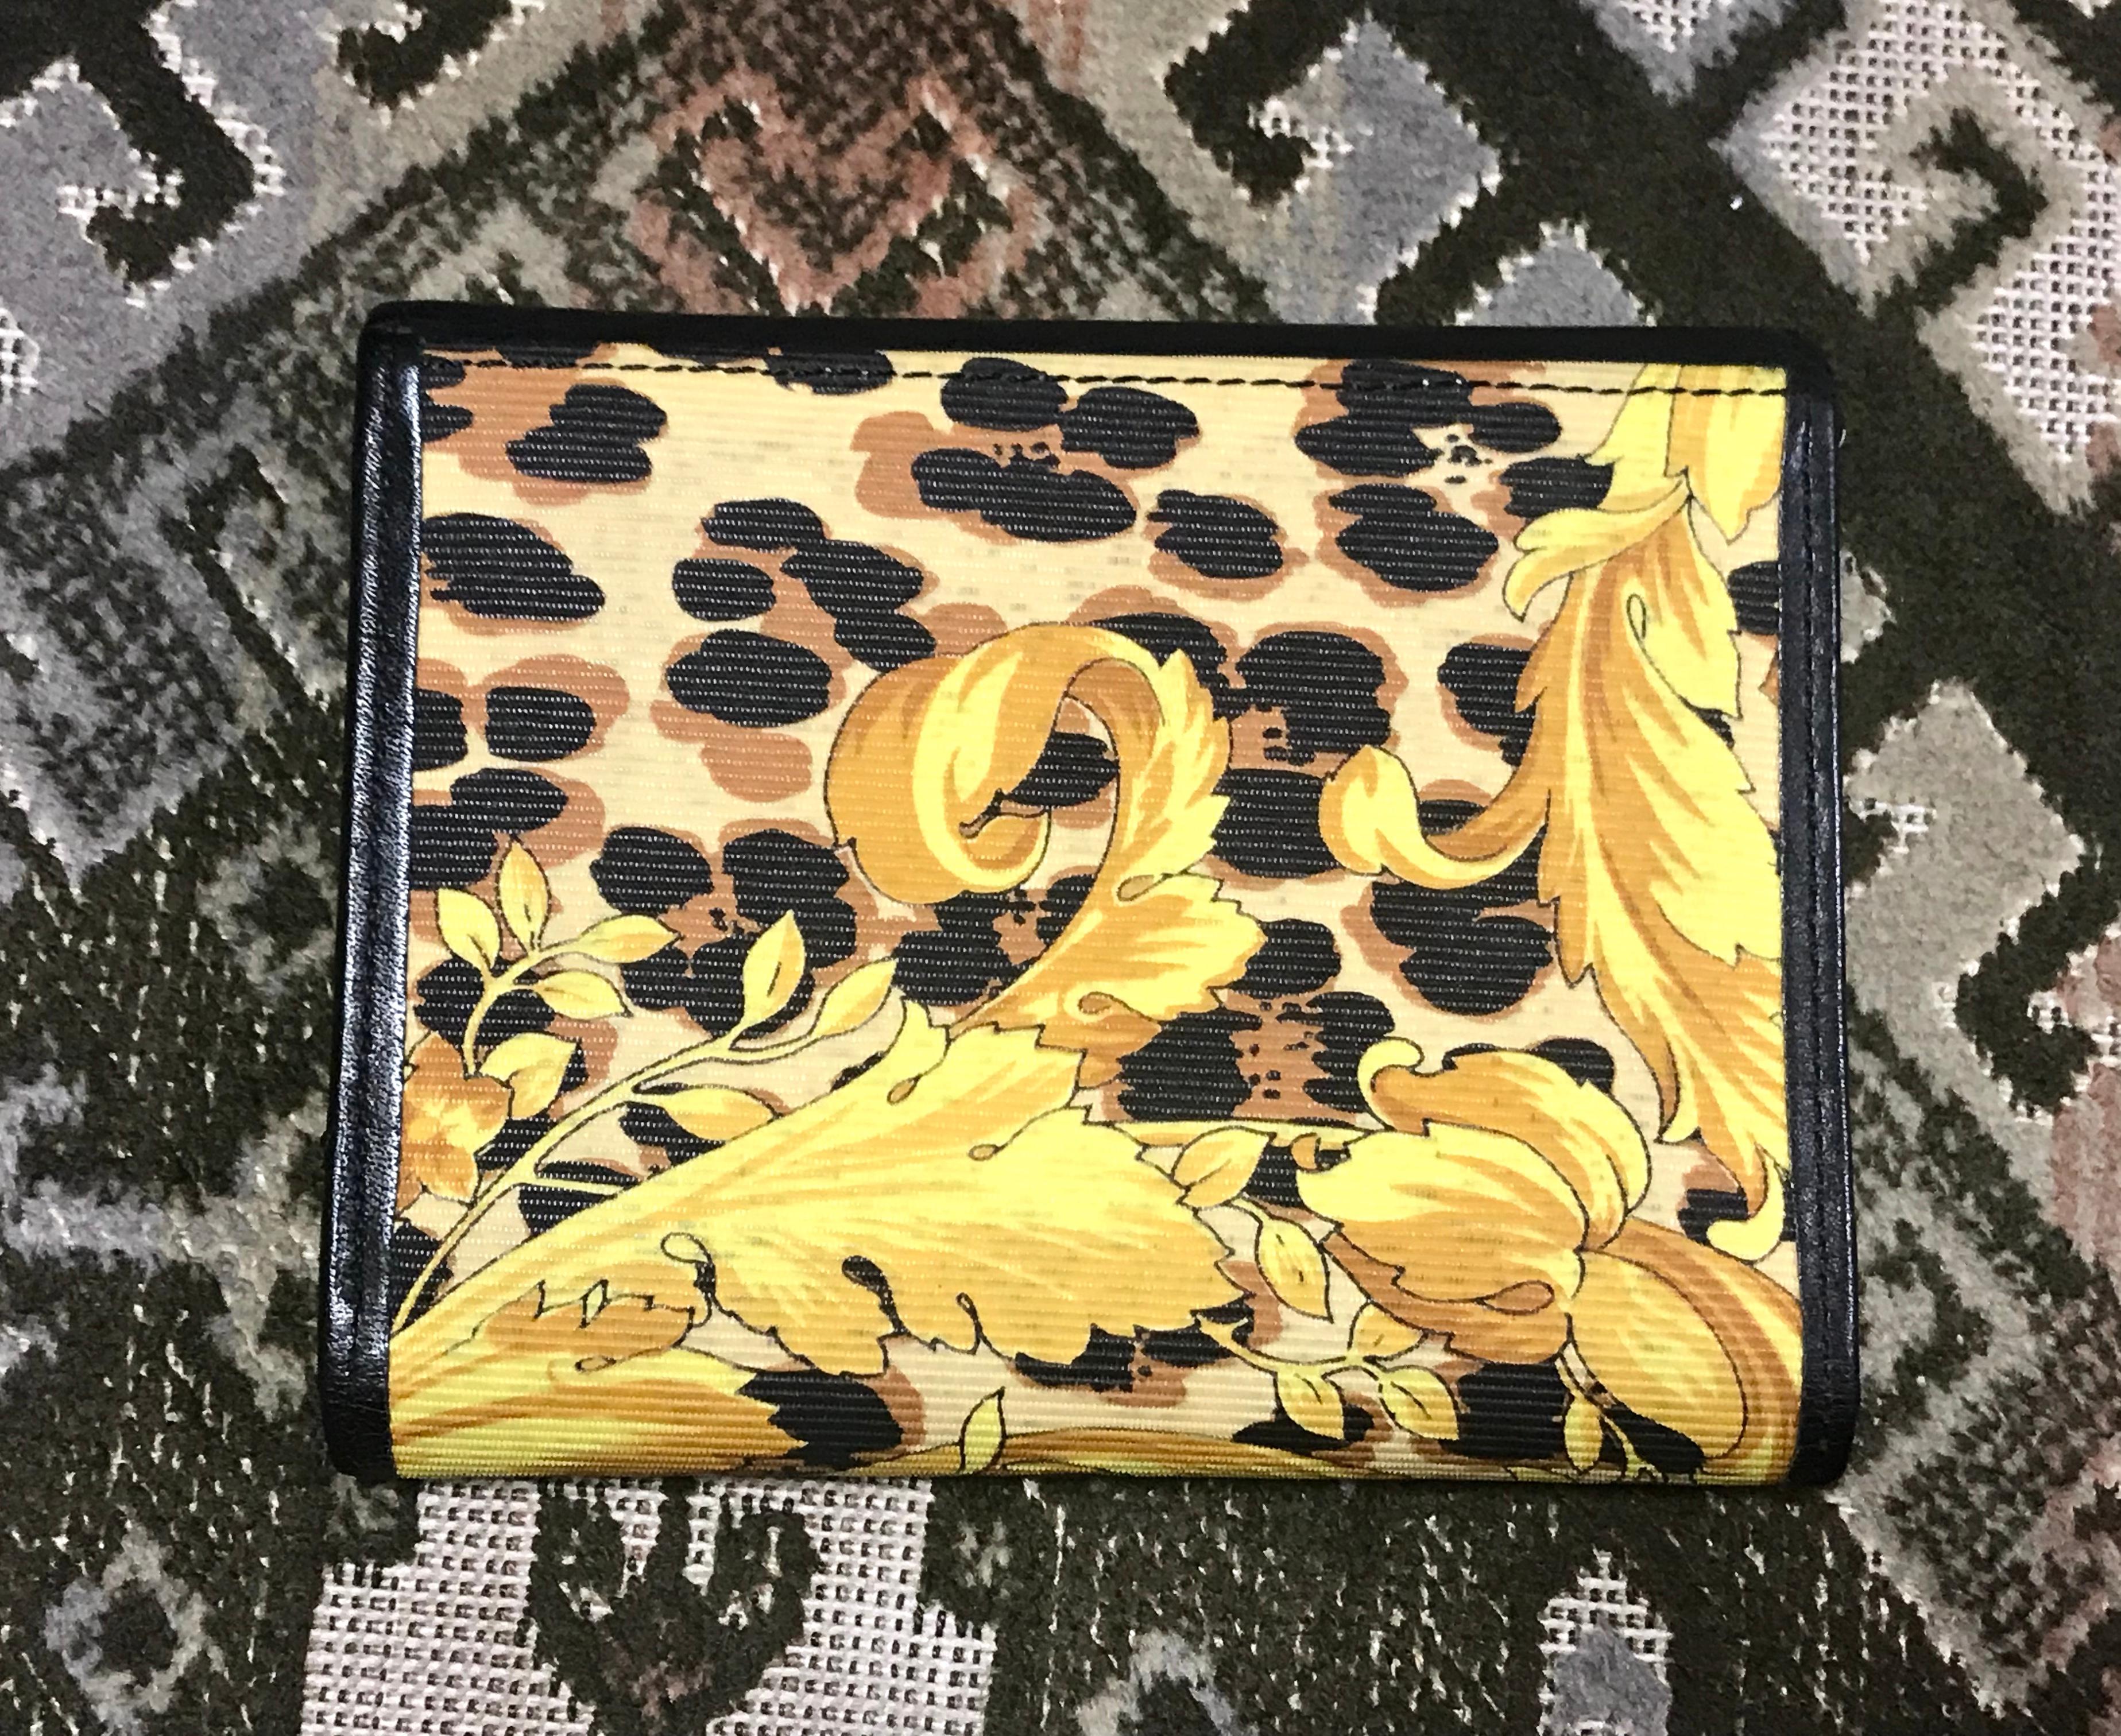 ***This wallet is for card case use only as there is no bill room and coin pocket.***

1990s. Vintage Gianni Versace black leather card case wallet with its iconic yellow and golden Edwardian arabesque print. 
Great gift for Unisex use.

For all